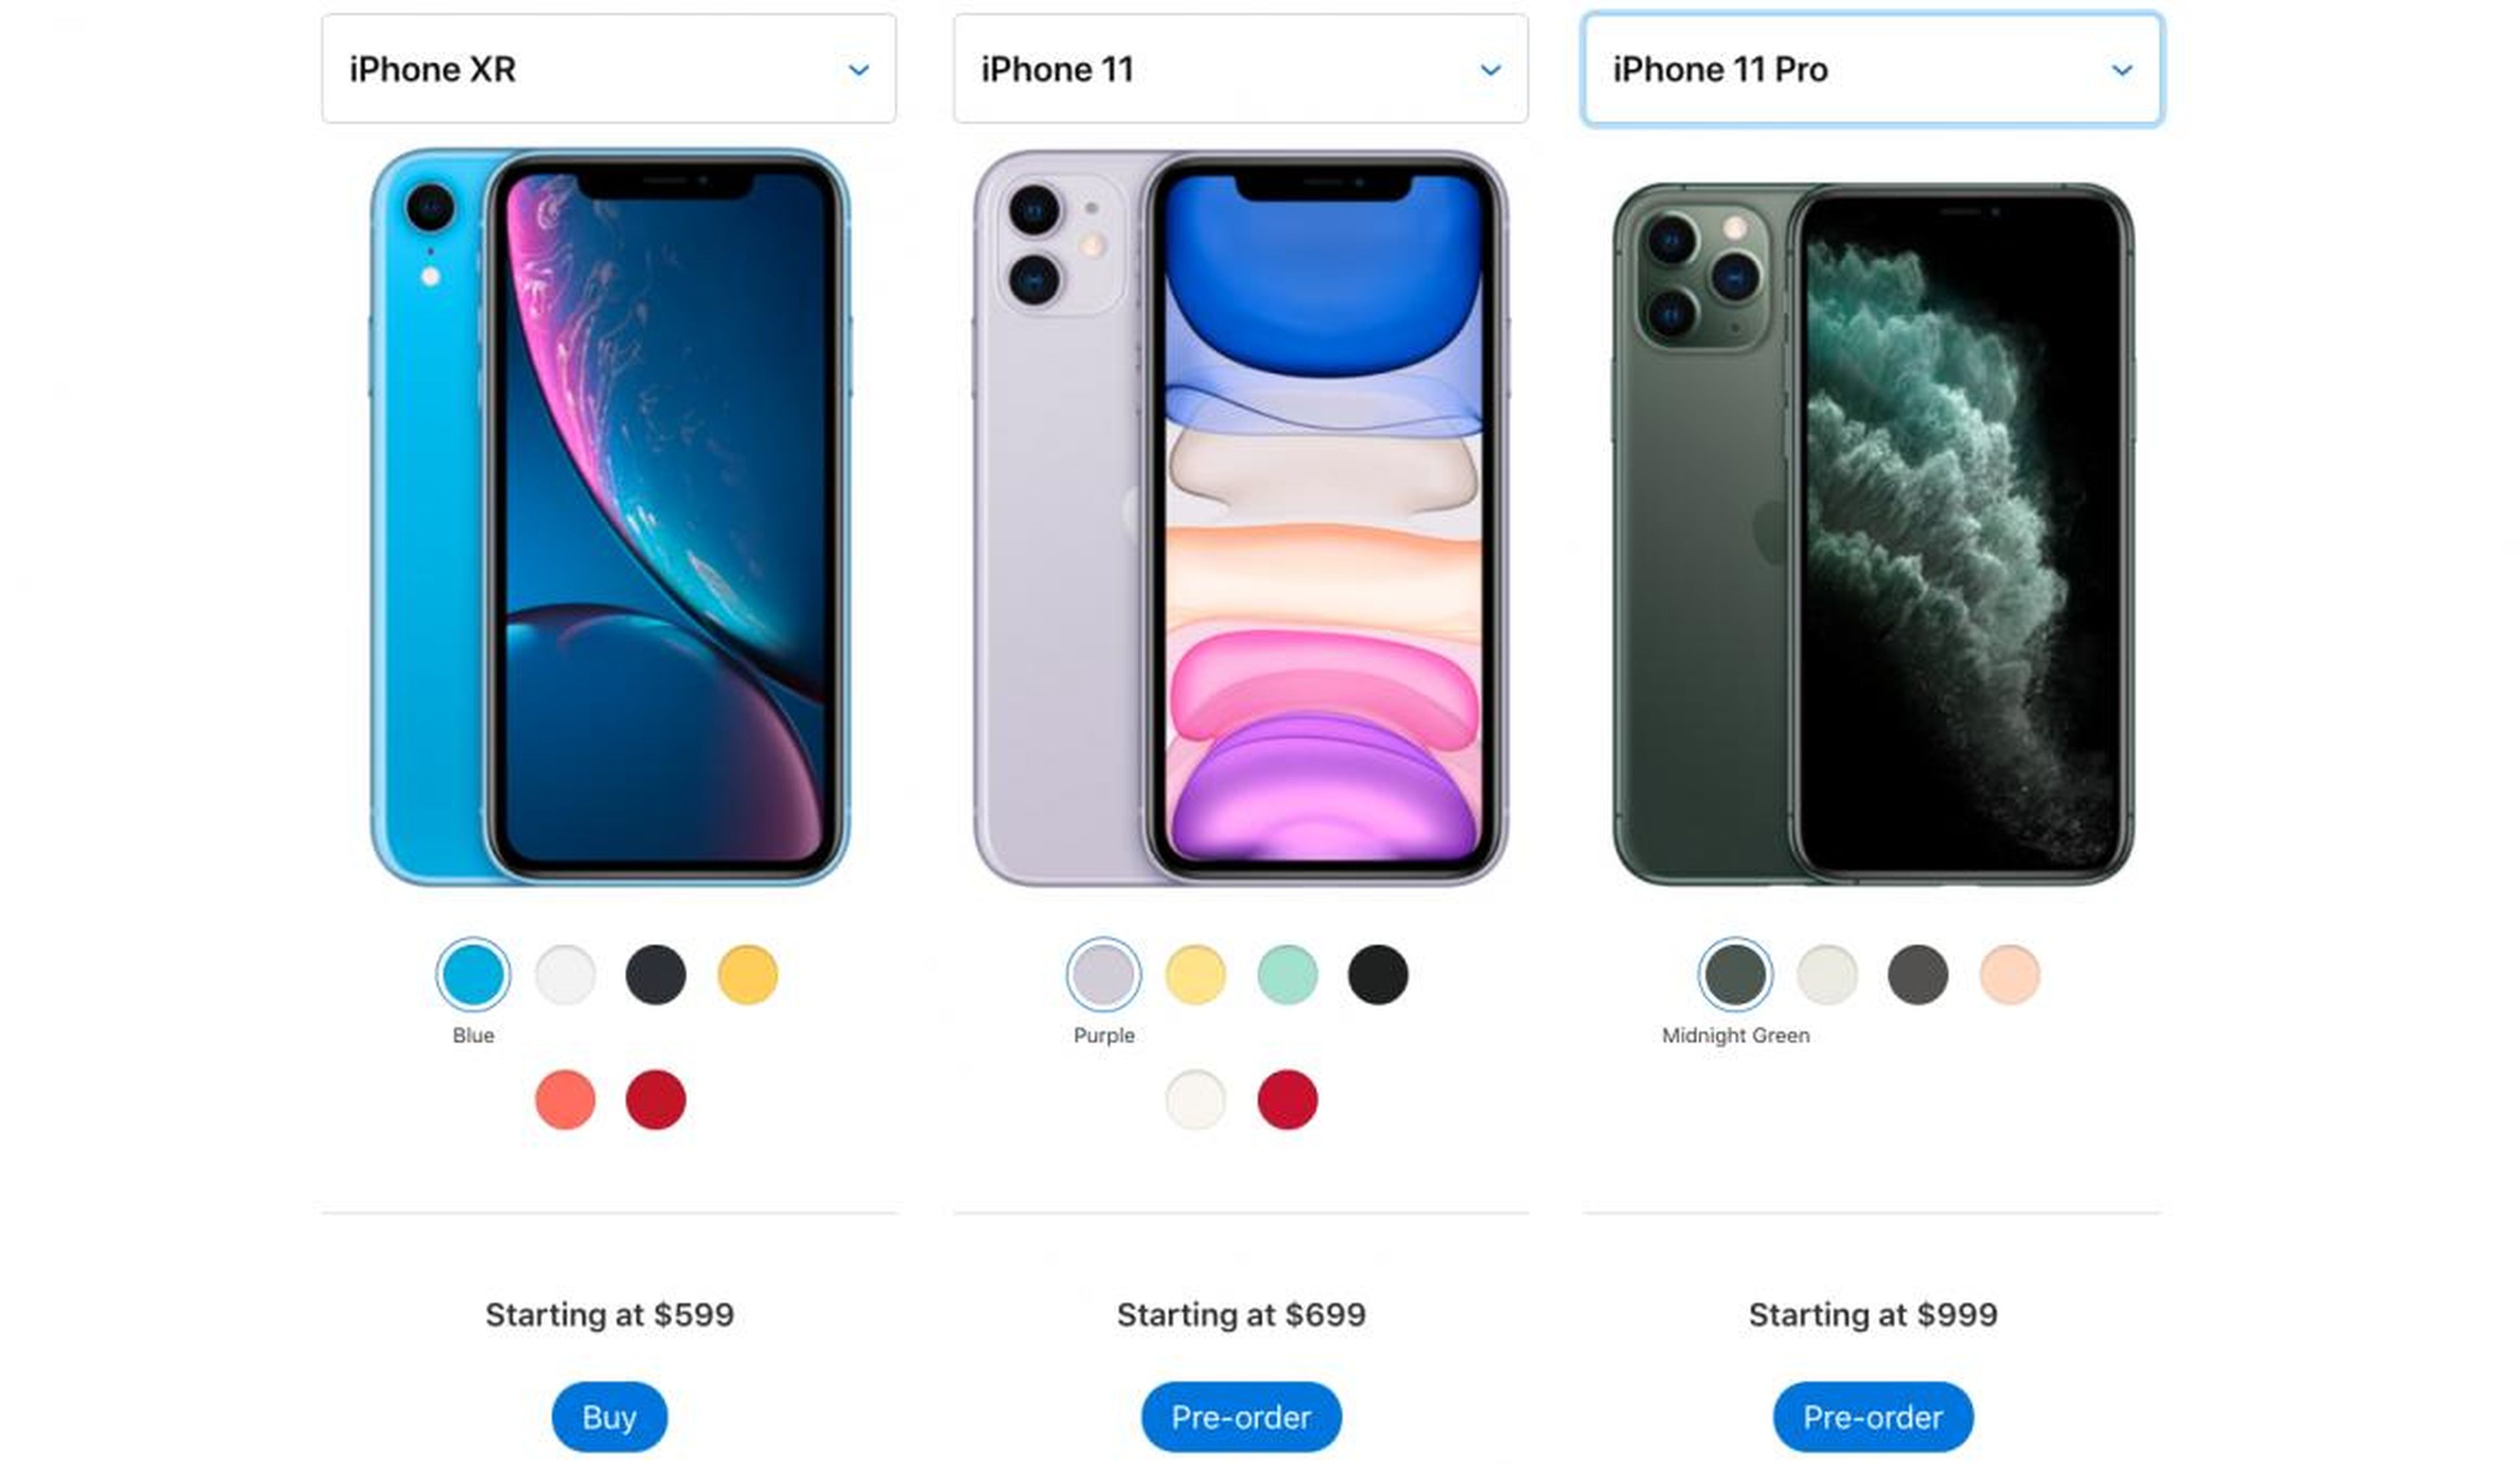 At $600, the iPhone XR is the "just right" option for most people.